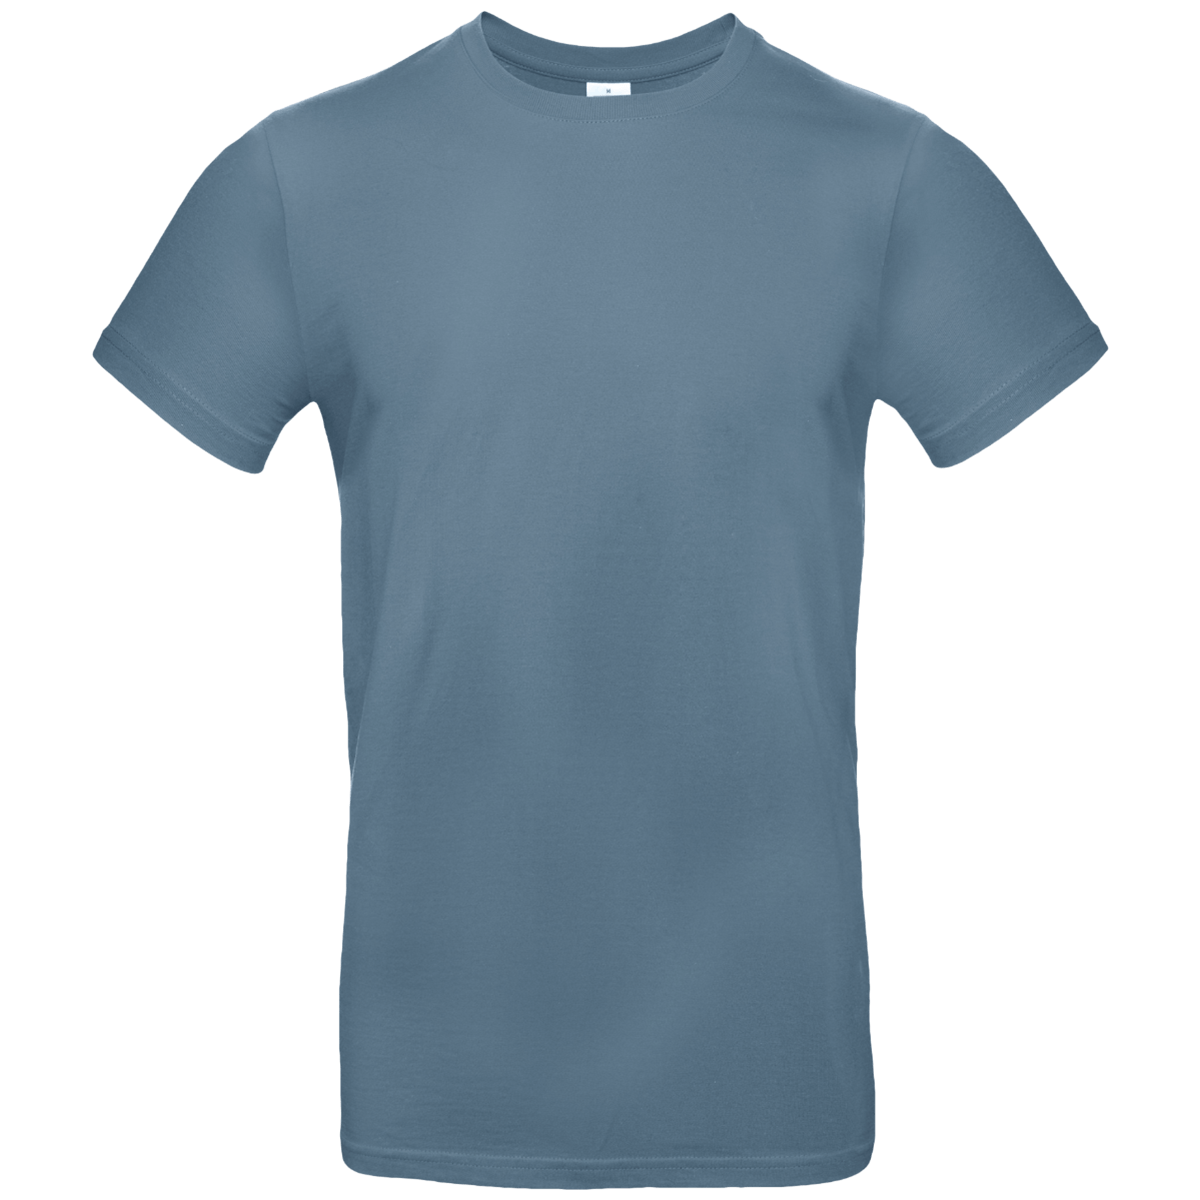 Tee-Shirt Homme Personnalisable Sur Tunetoo Stone Blue